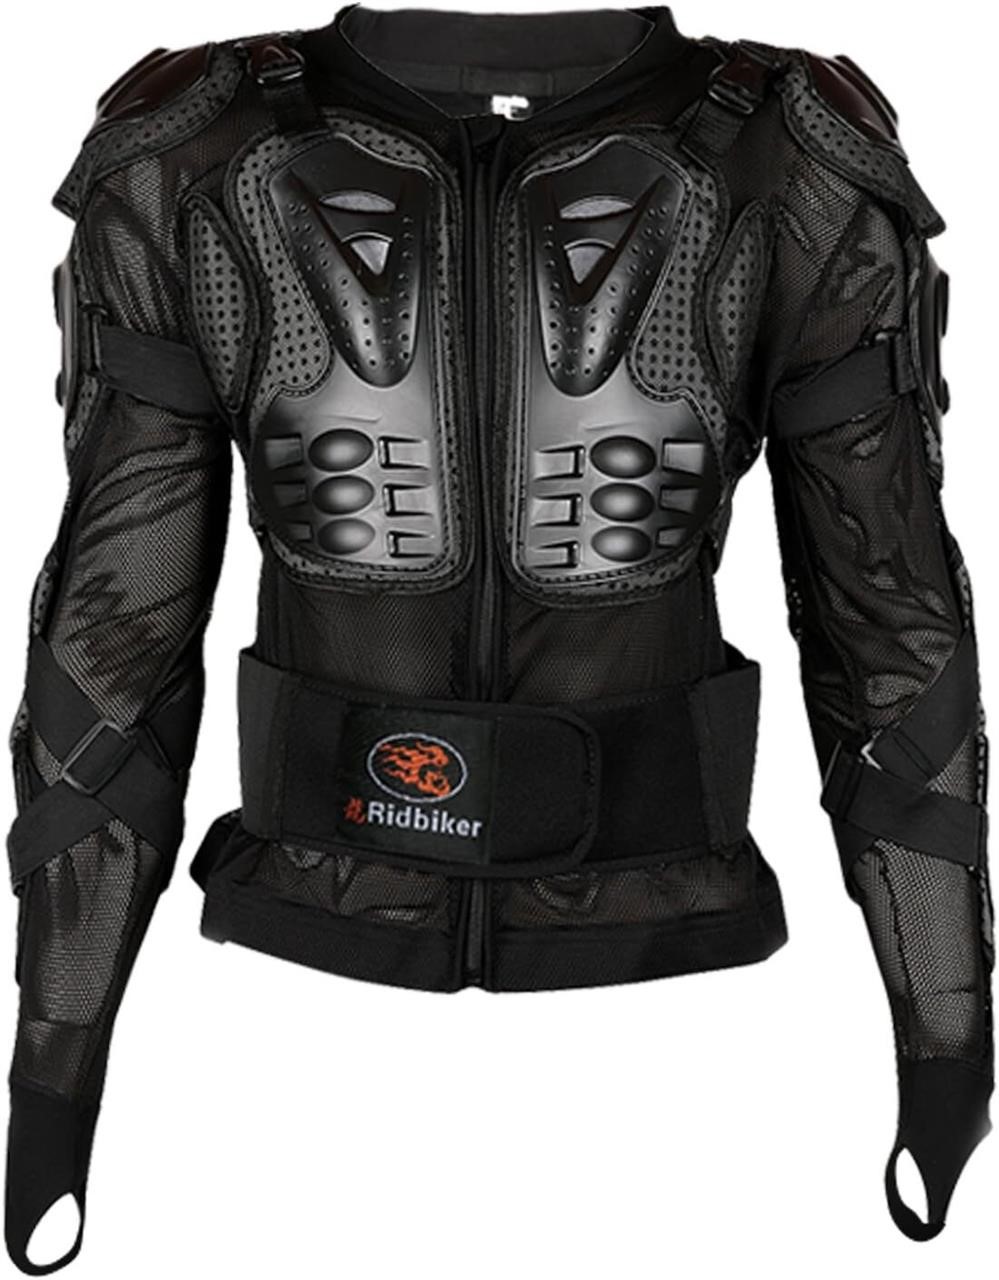 RIDBIKER Motorcycle Full Body Armor Protector Remo